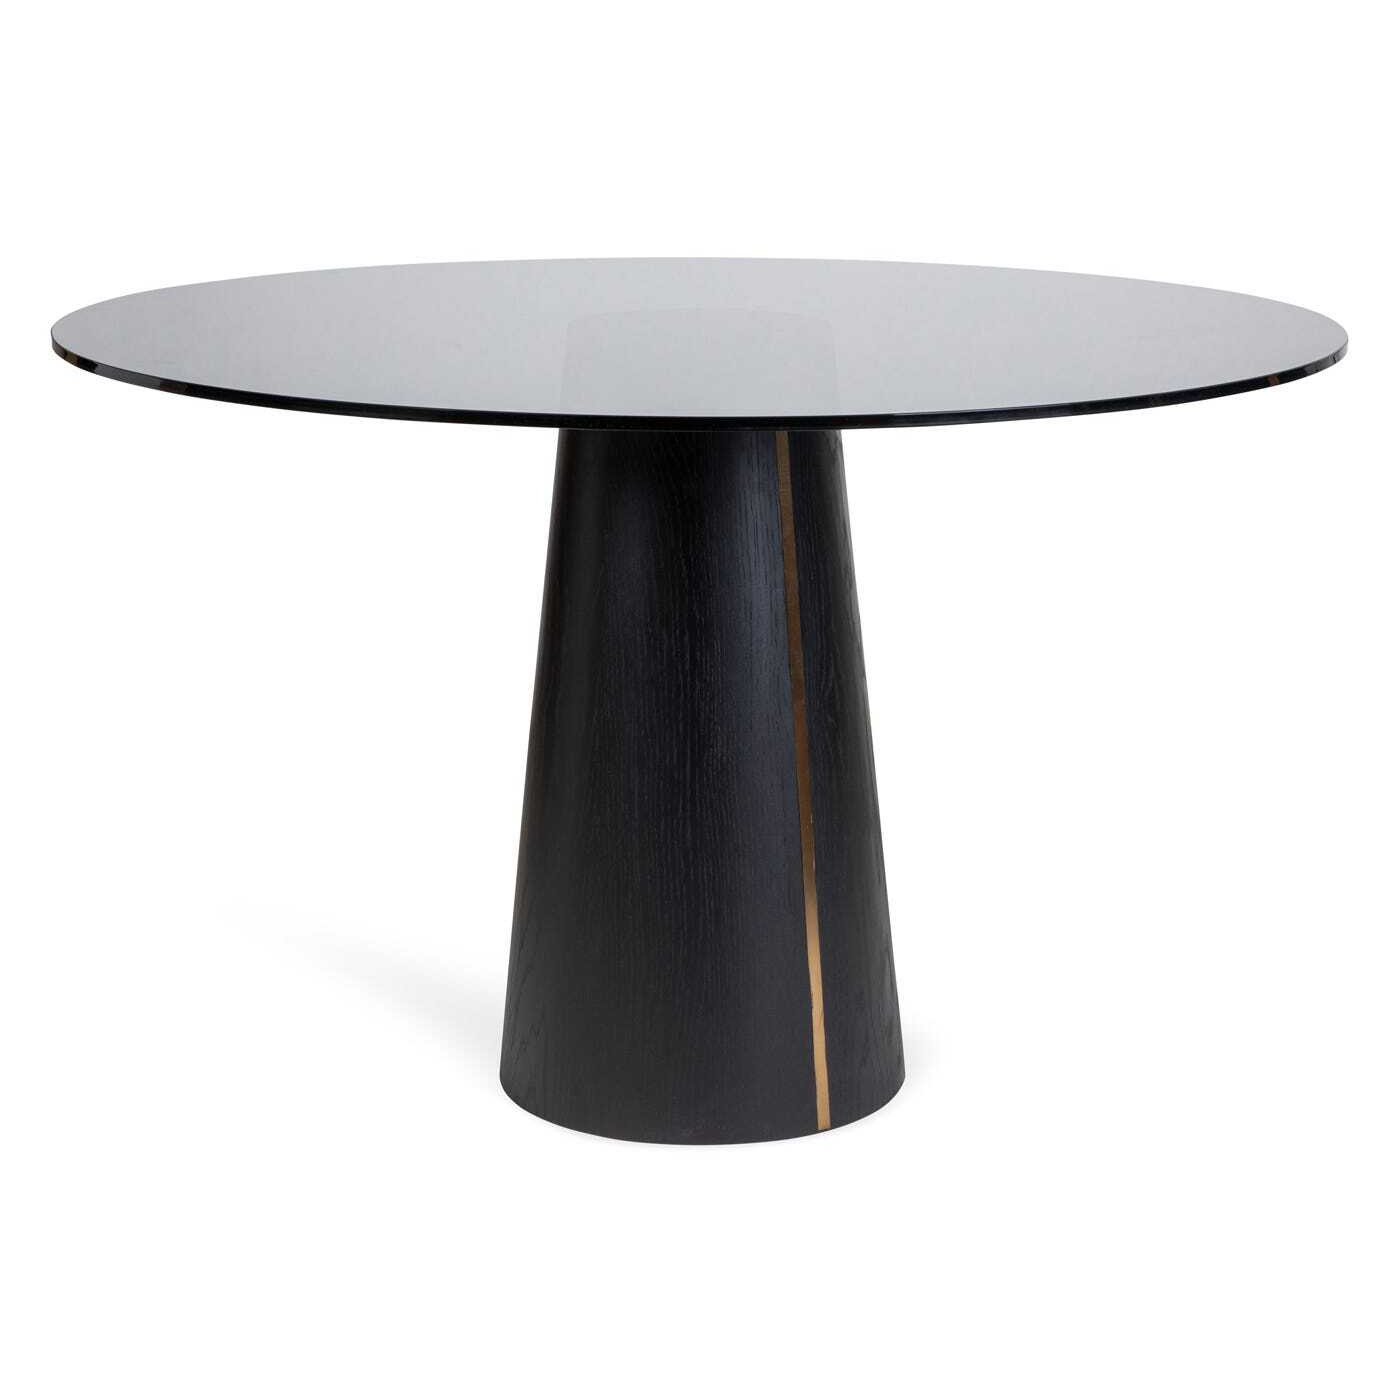 Heal's Totem Pedestal Dining Table